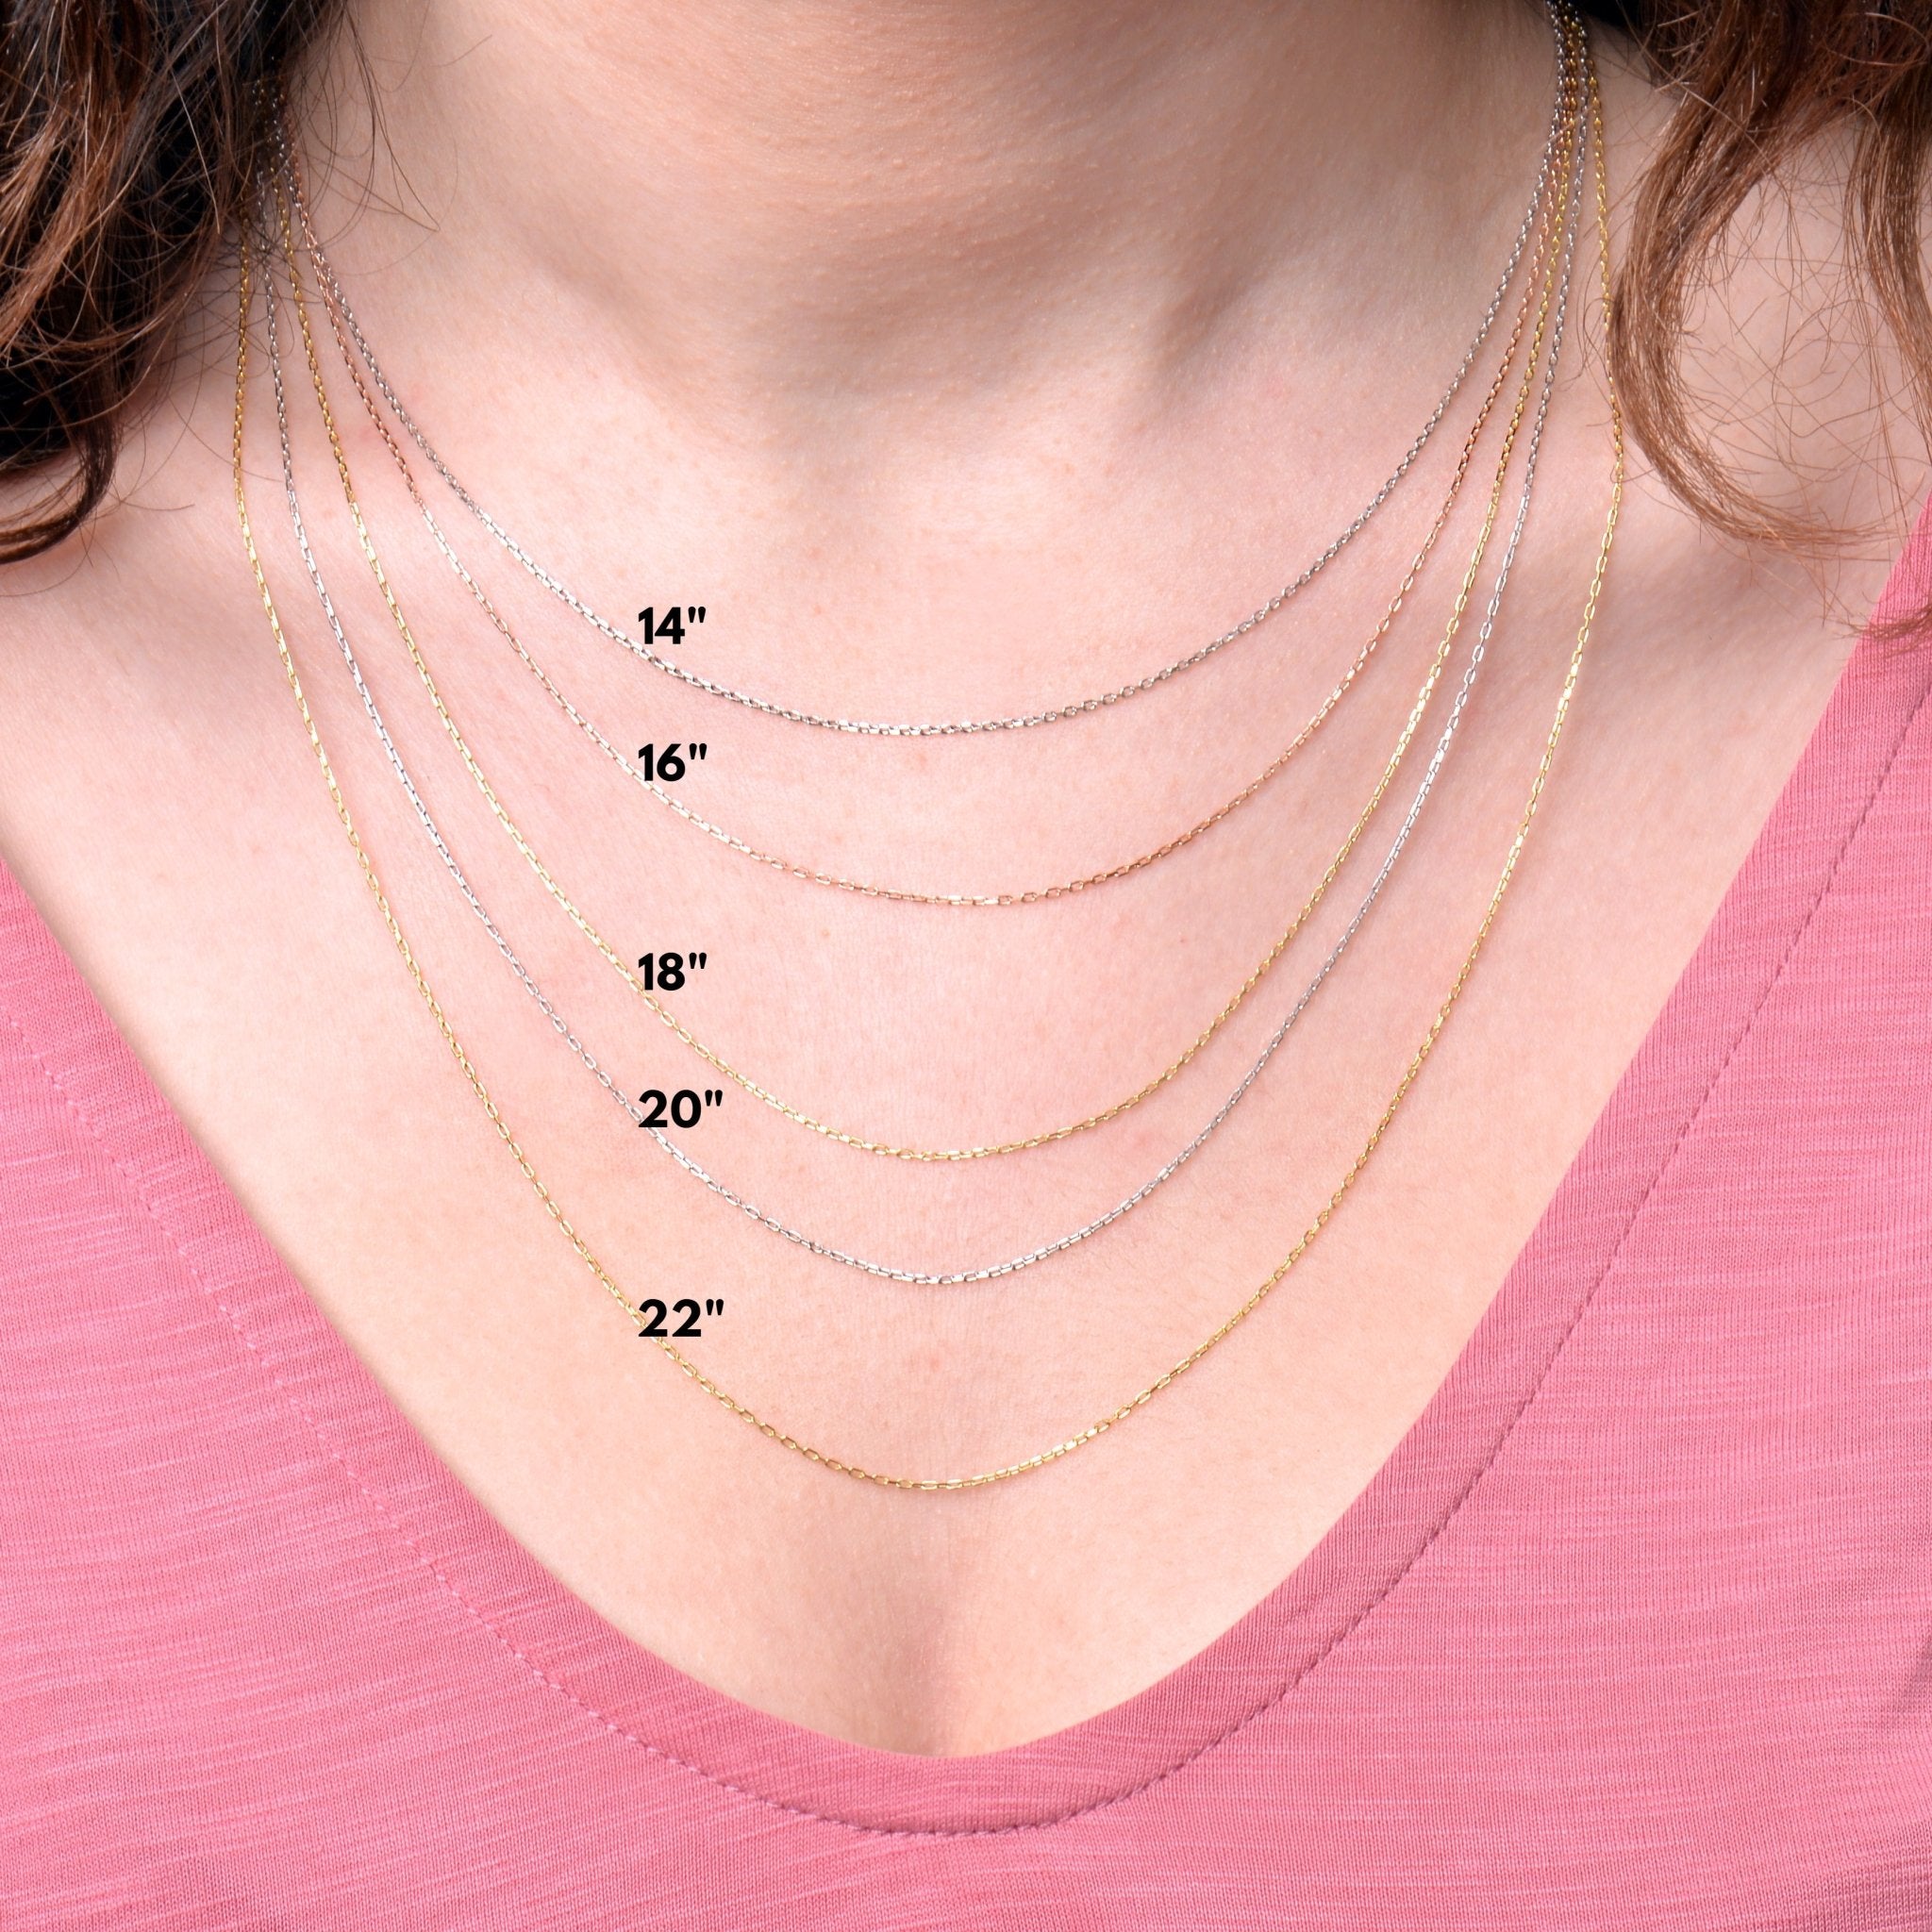 Personalized Jewelry Gift Necklace Length from 14'' to 20''